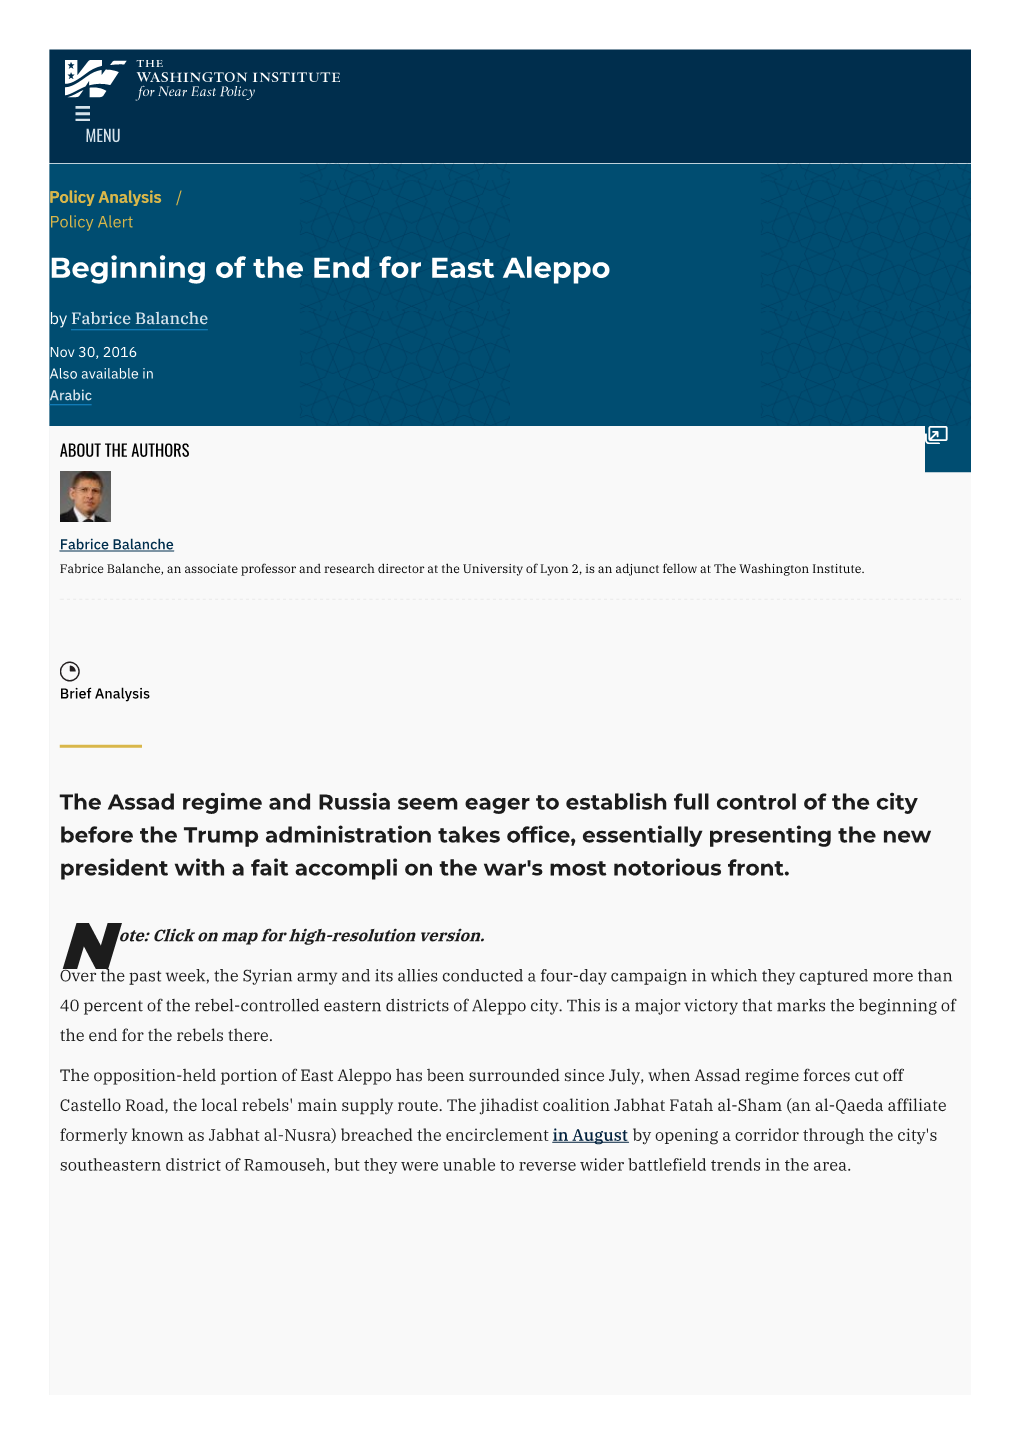 Beginning of the End for East Aleppo | the Washington Institute